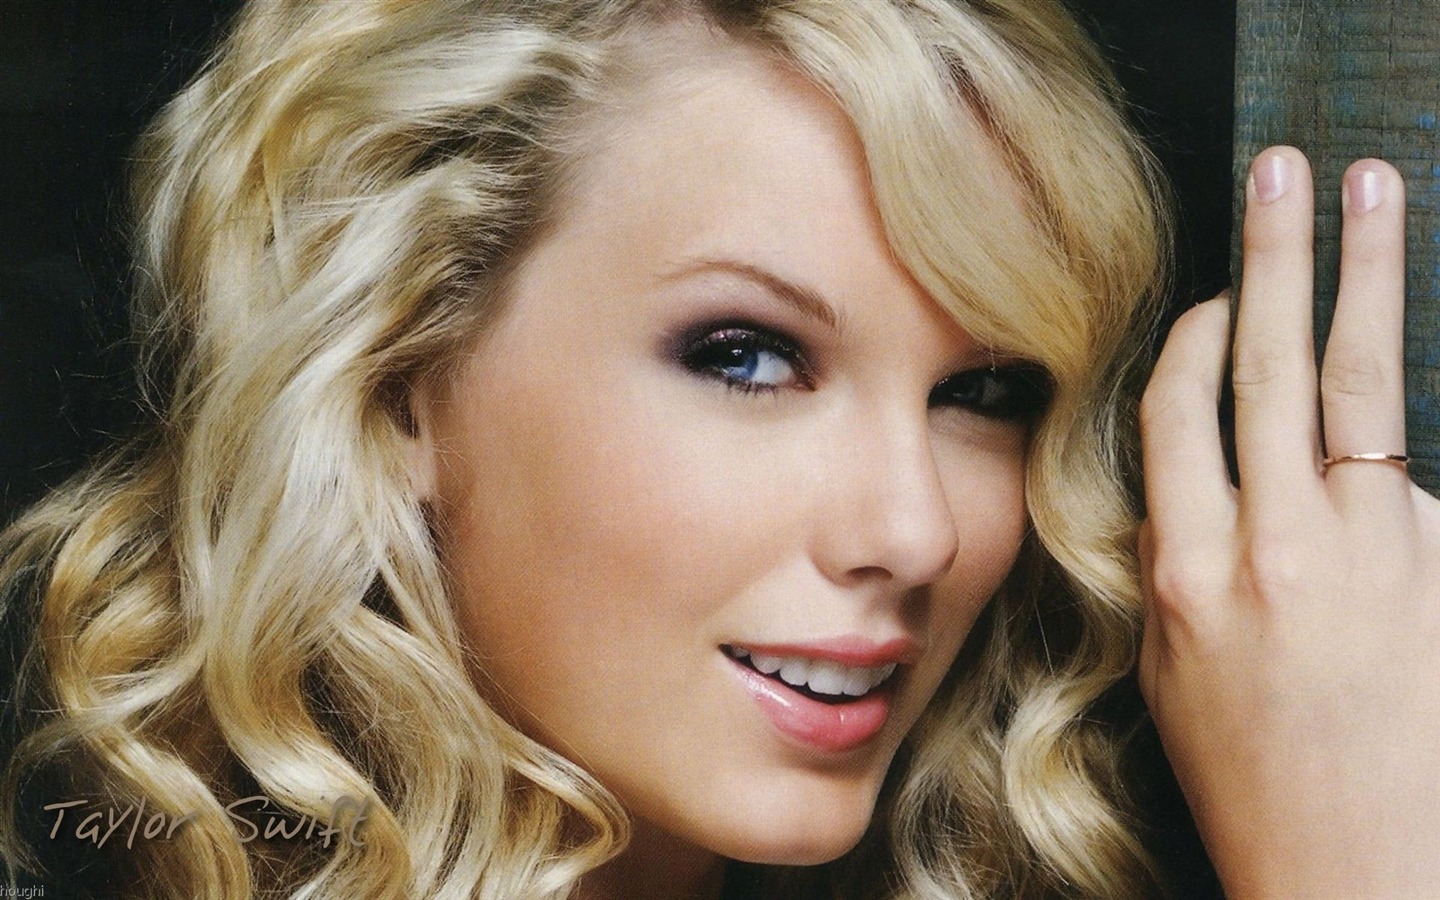 Taylor Swift #060 - 1440x900 Wallpapers Pictures Photos Images